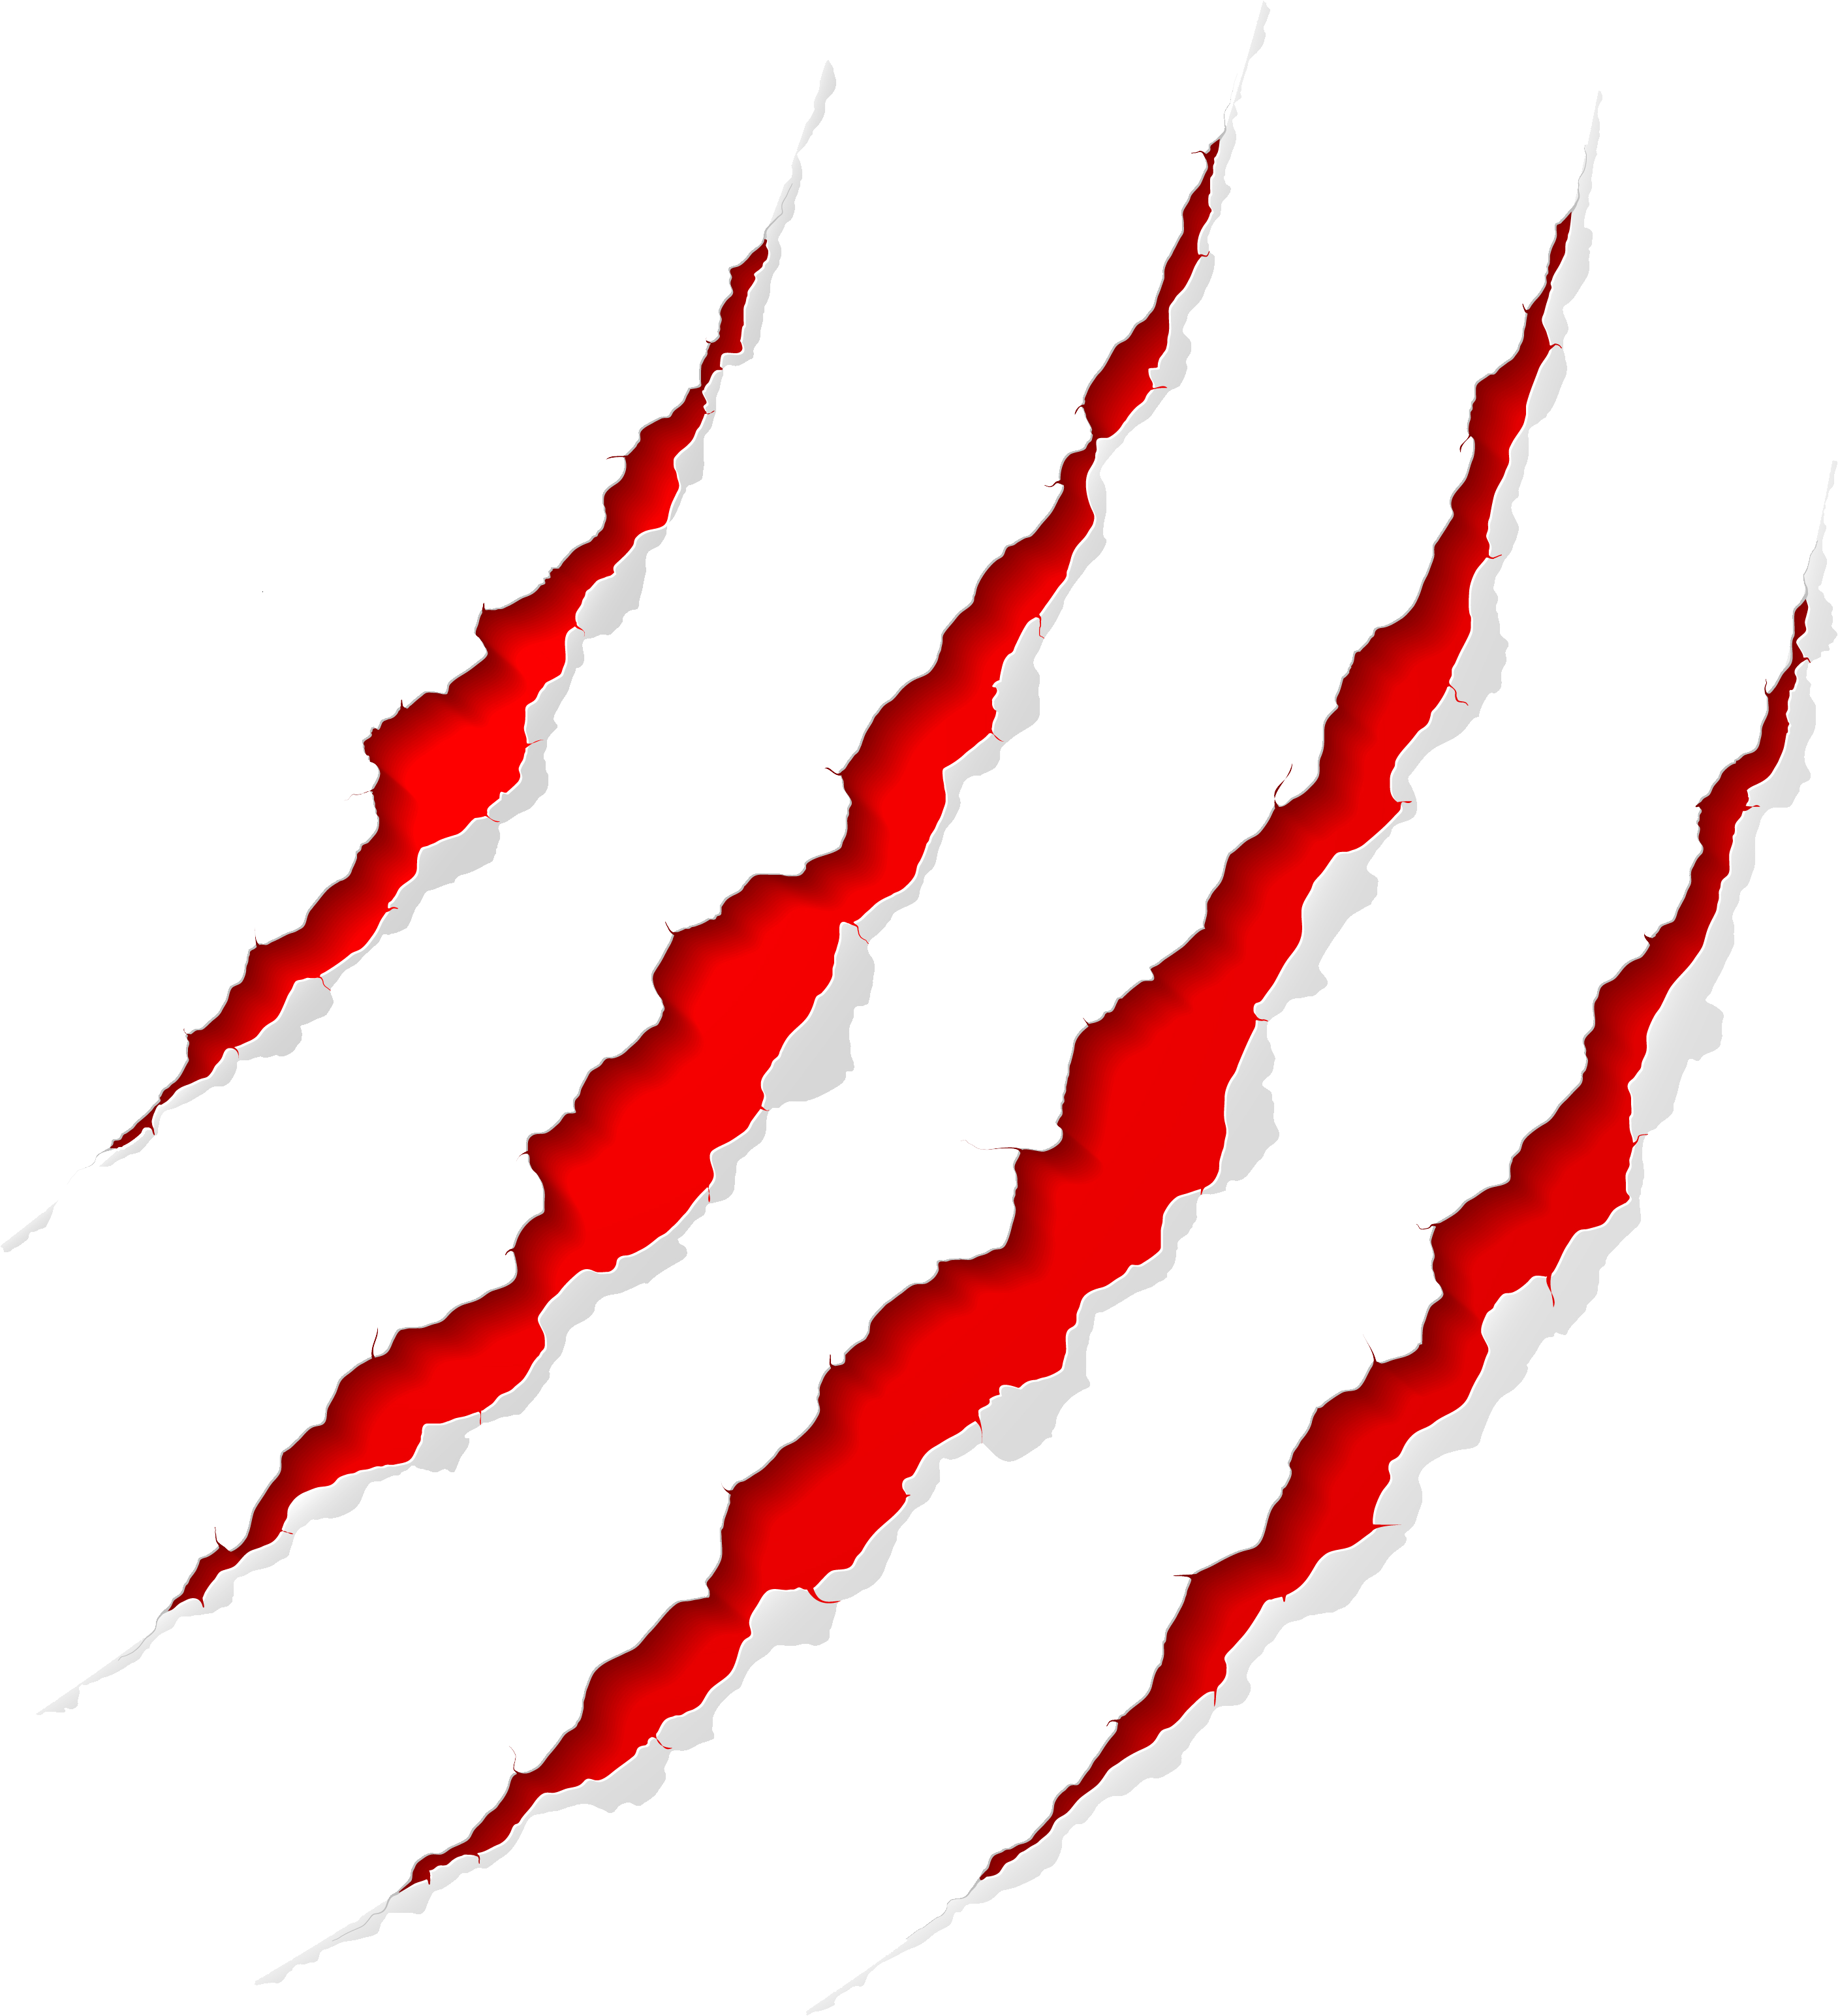 red Monster claw scratch PNG Image - PurePNG | Free transparent CC0 ...